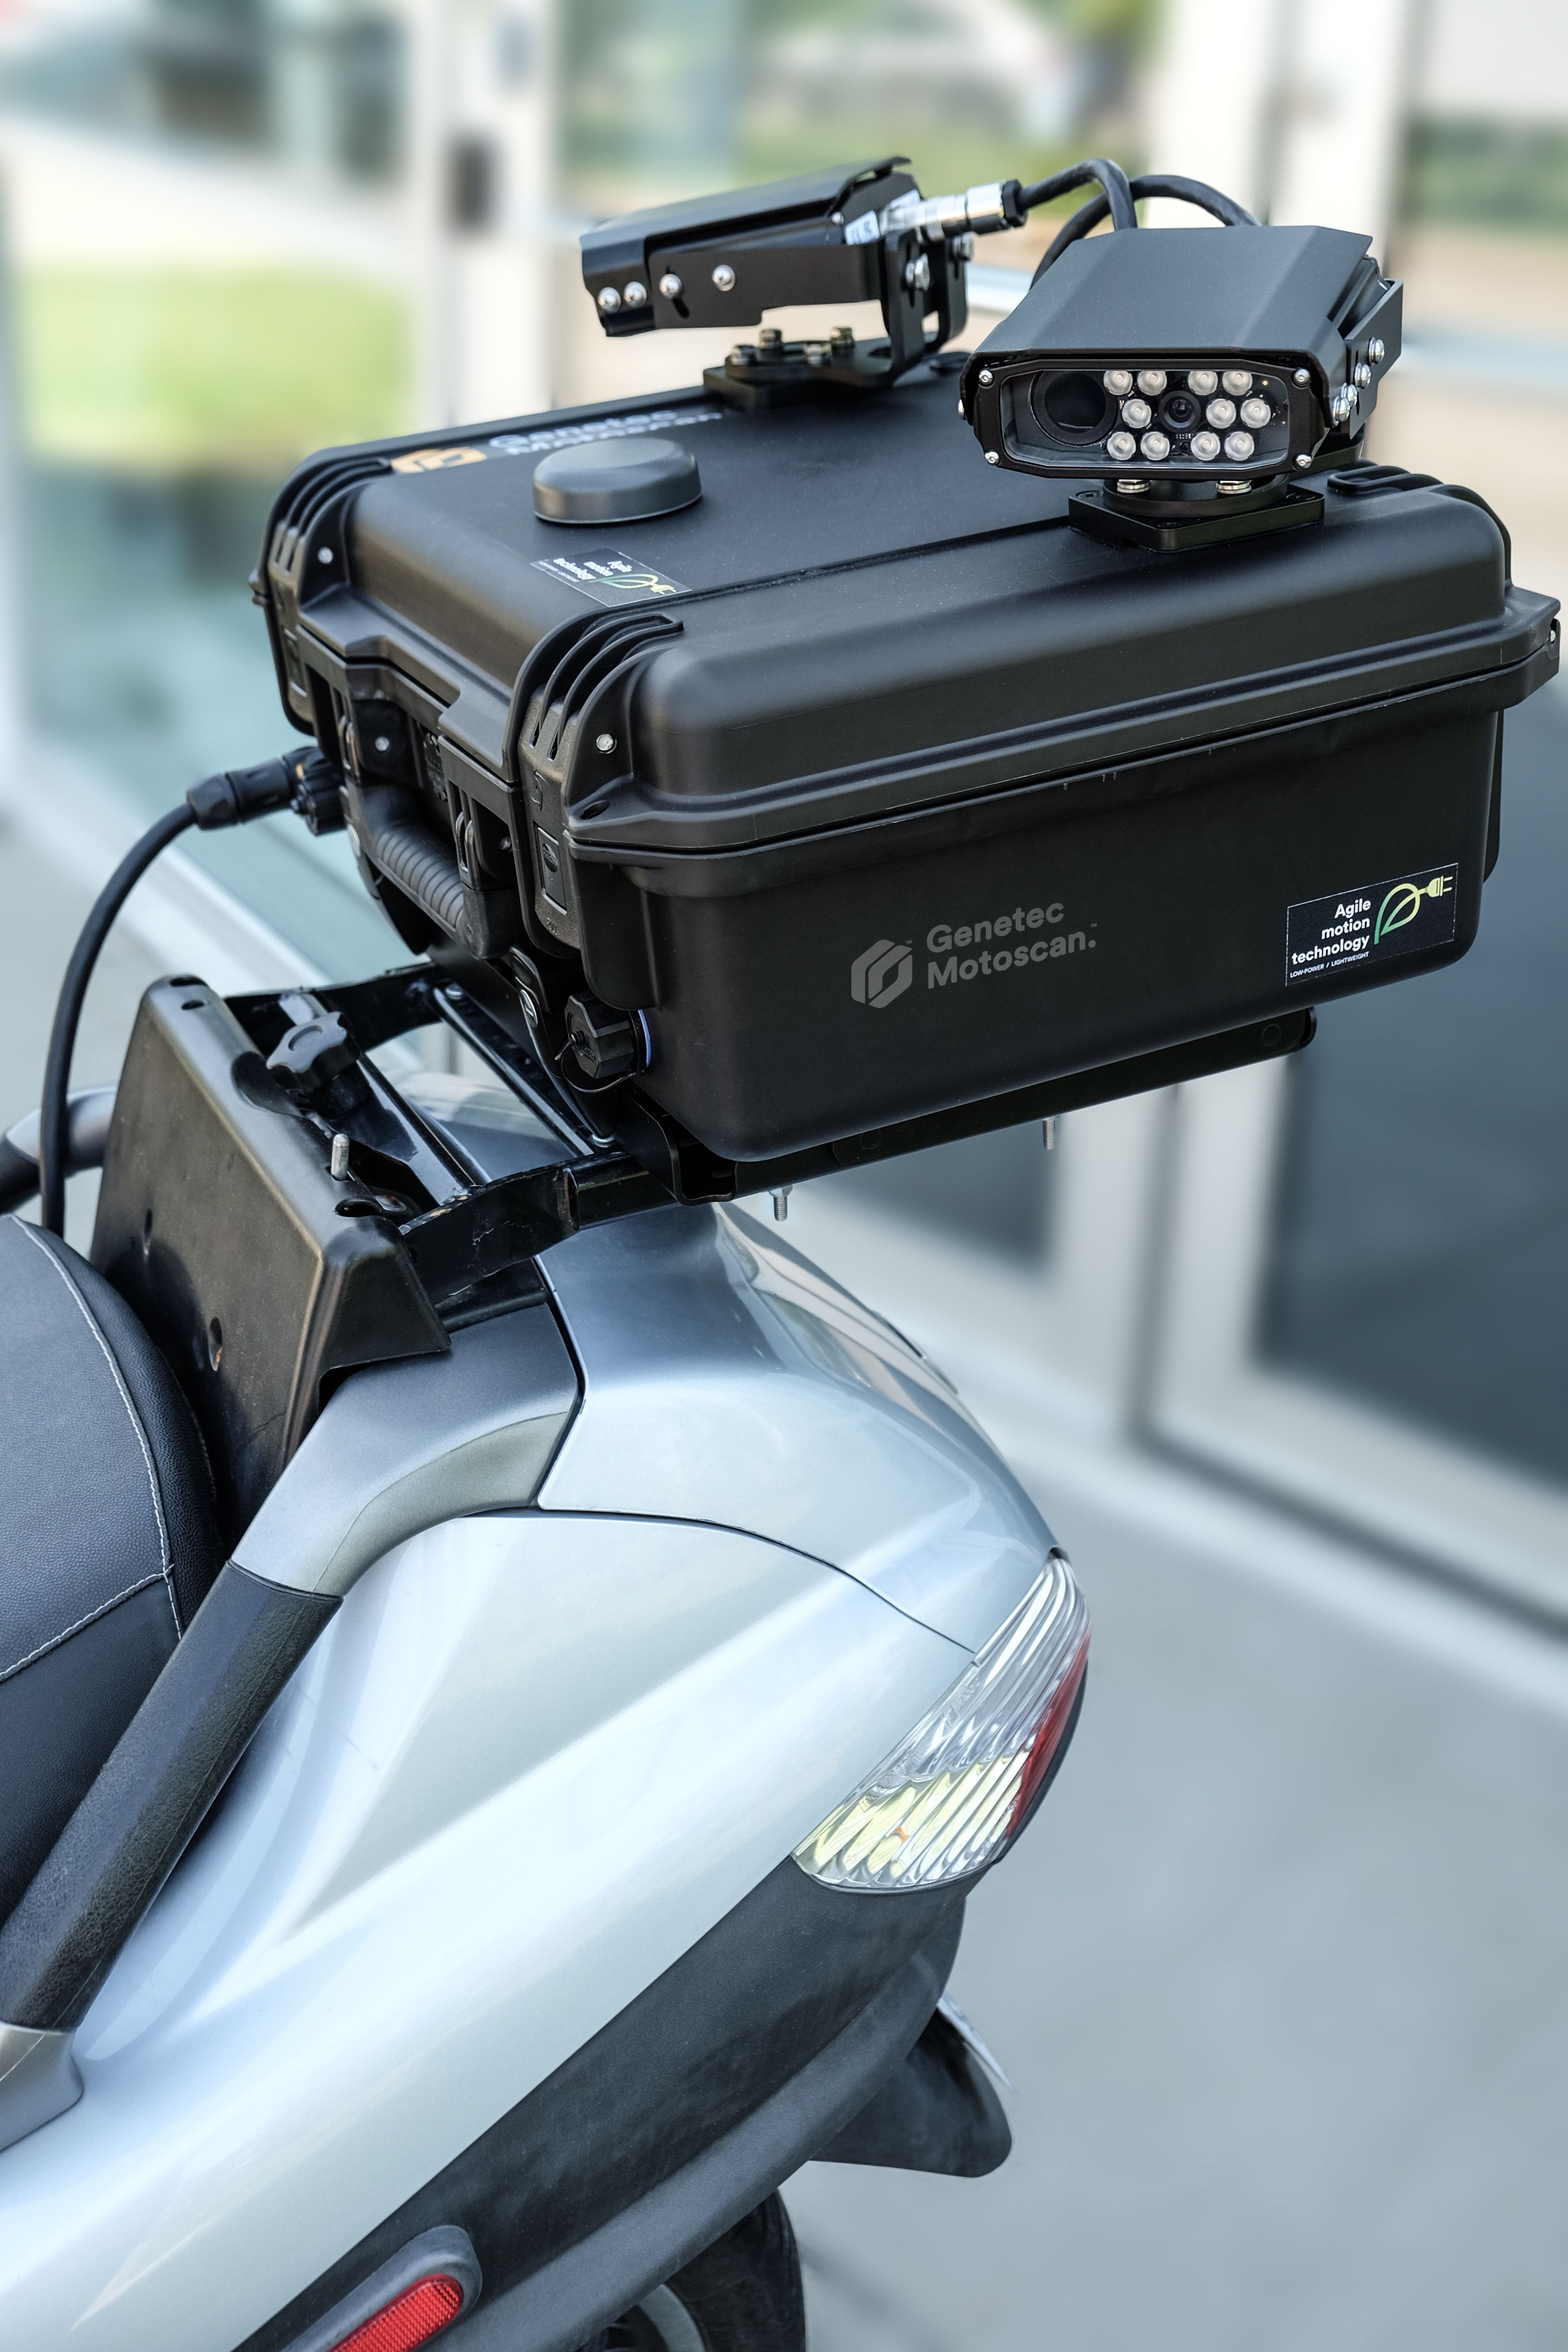 - Motoscan packs two ALPR cameras and a processing unit in a compact case for scooters